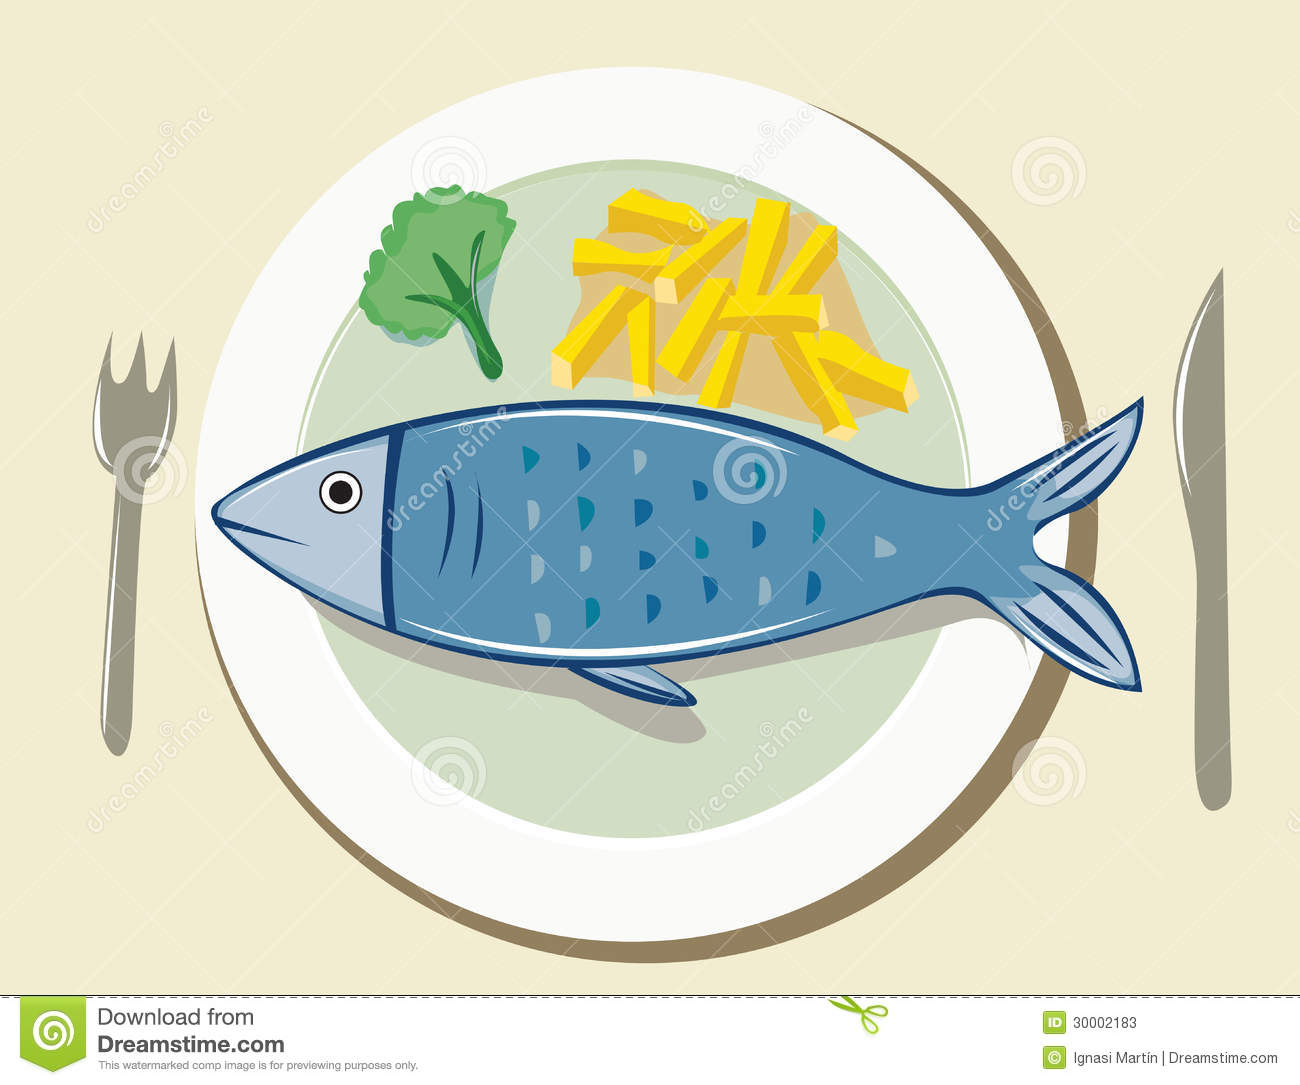 Fish And Chips Stock Photos   Image  30002183